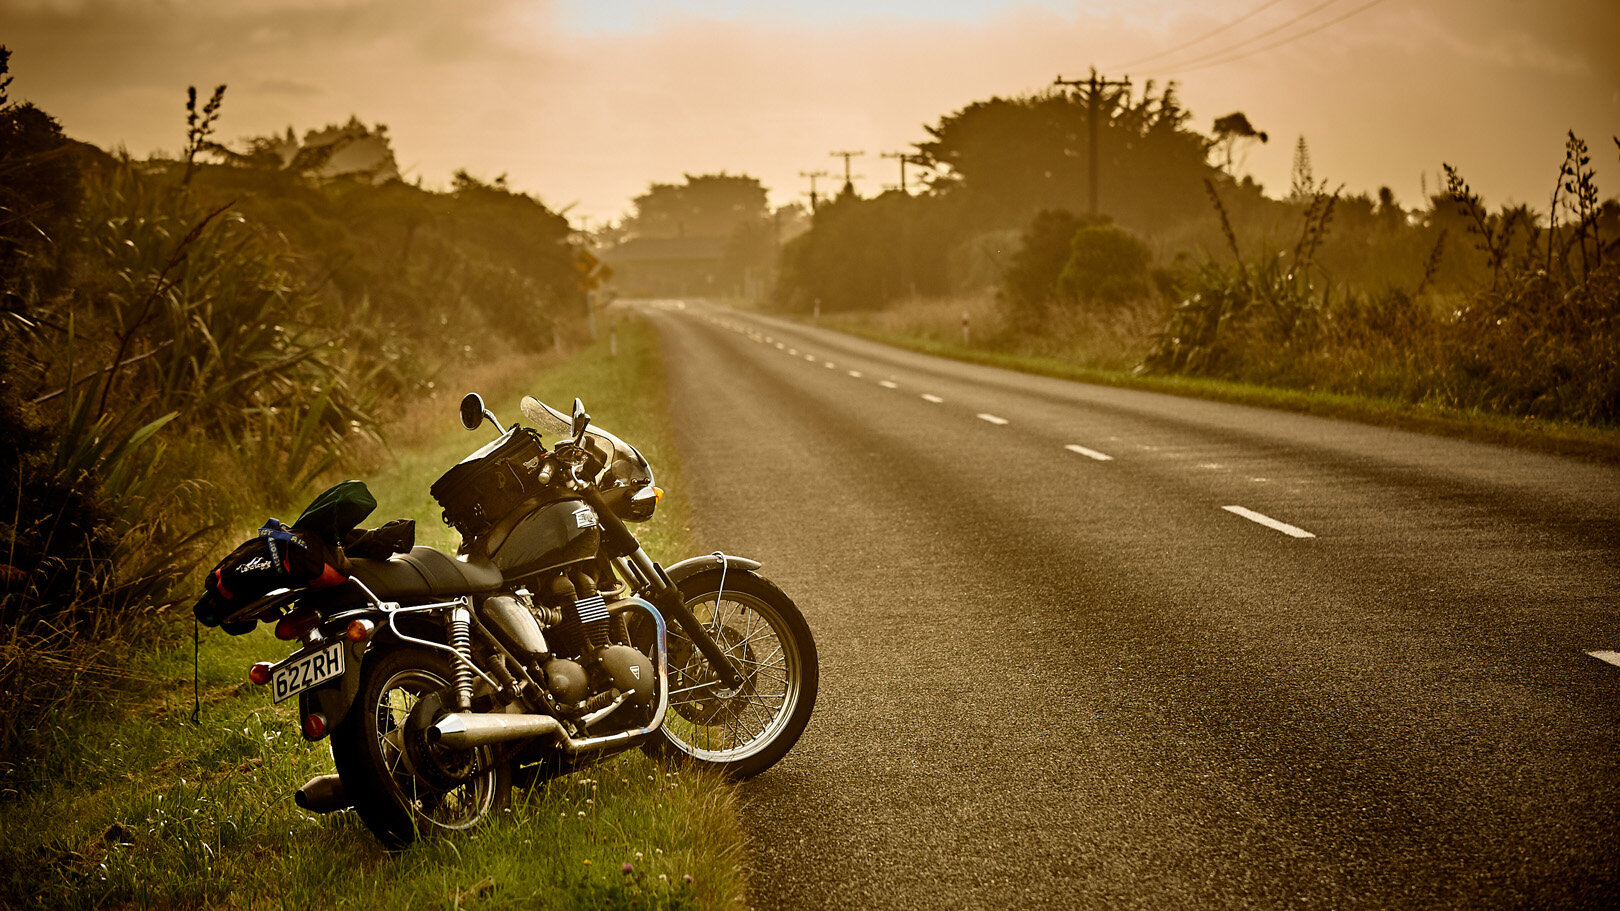 Many a photographic trip is taken by motorcycle, best of both worlds